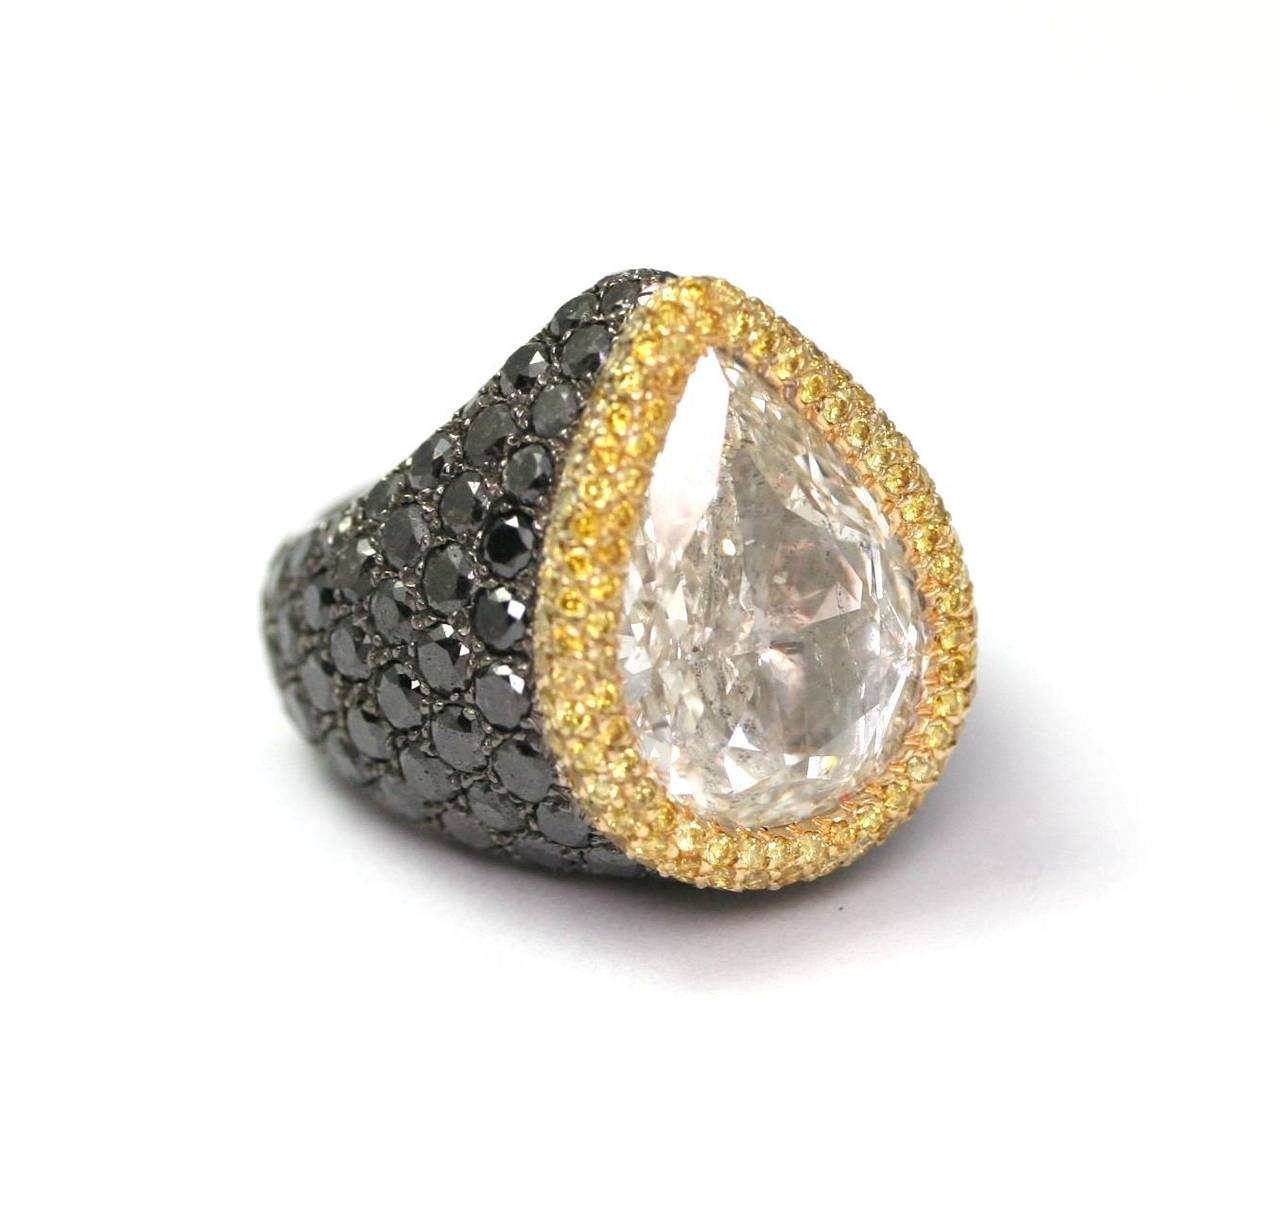 De Grisogono Ring set with a pear shape diamond of 10.85 carats, color I, purity SI2, from the best Belgium laboratory, HRD certificated, surrounded by Fancy yellow and black  diamonds, on a white gold ring,  size 9 ¼ (28,9grs)
This ring is a unique